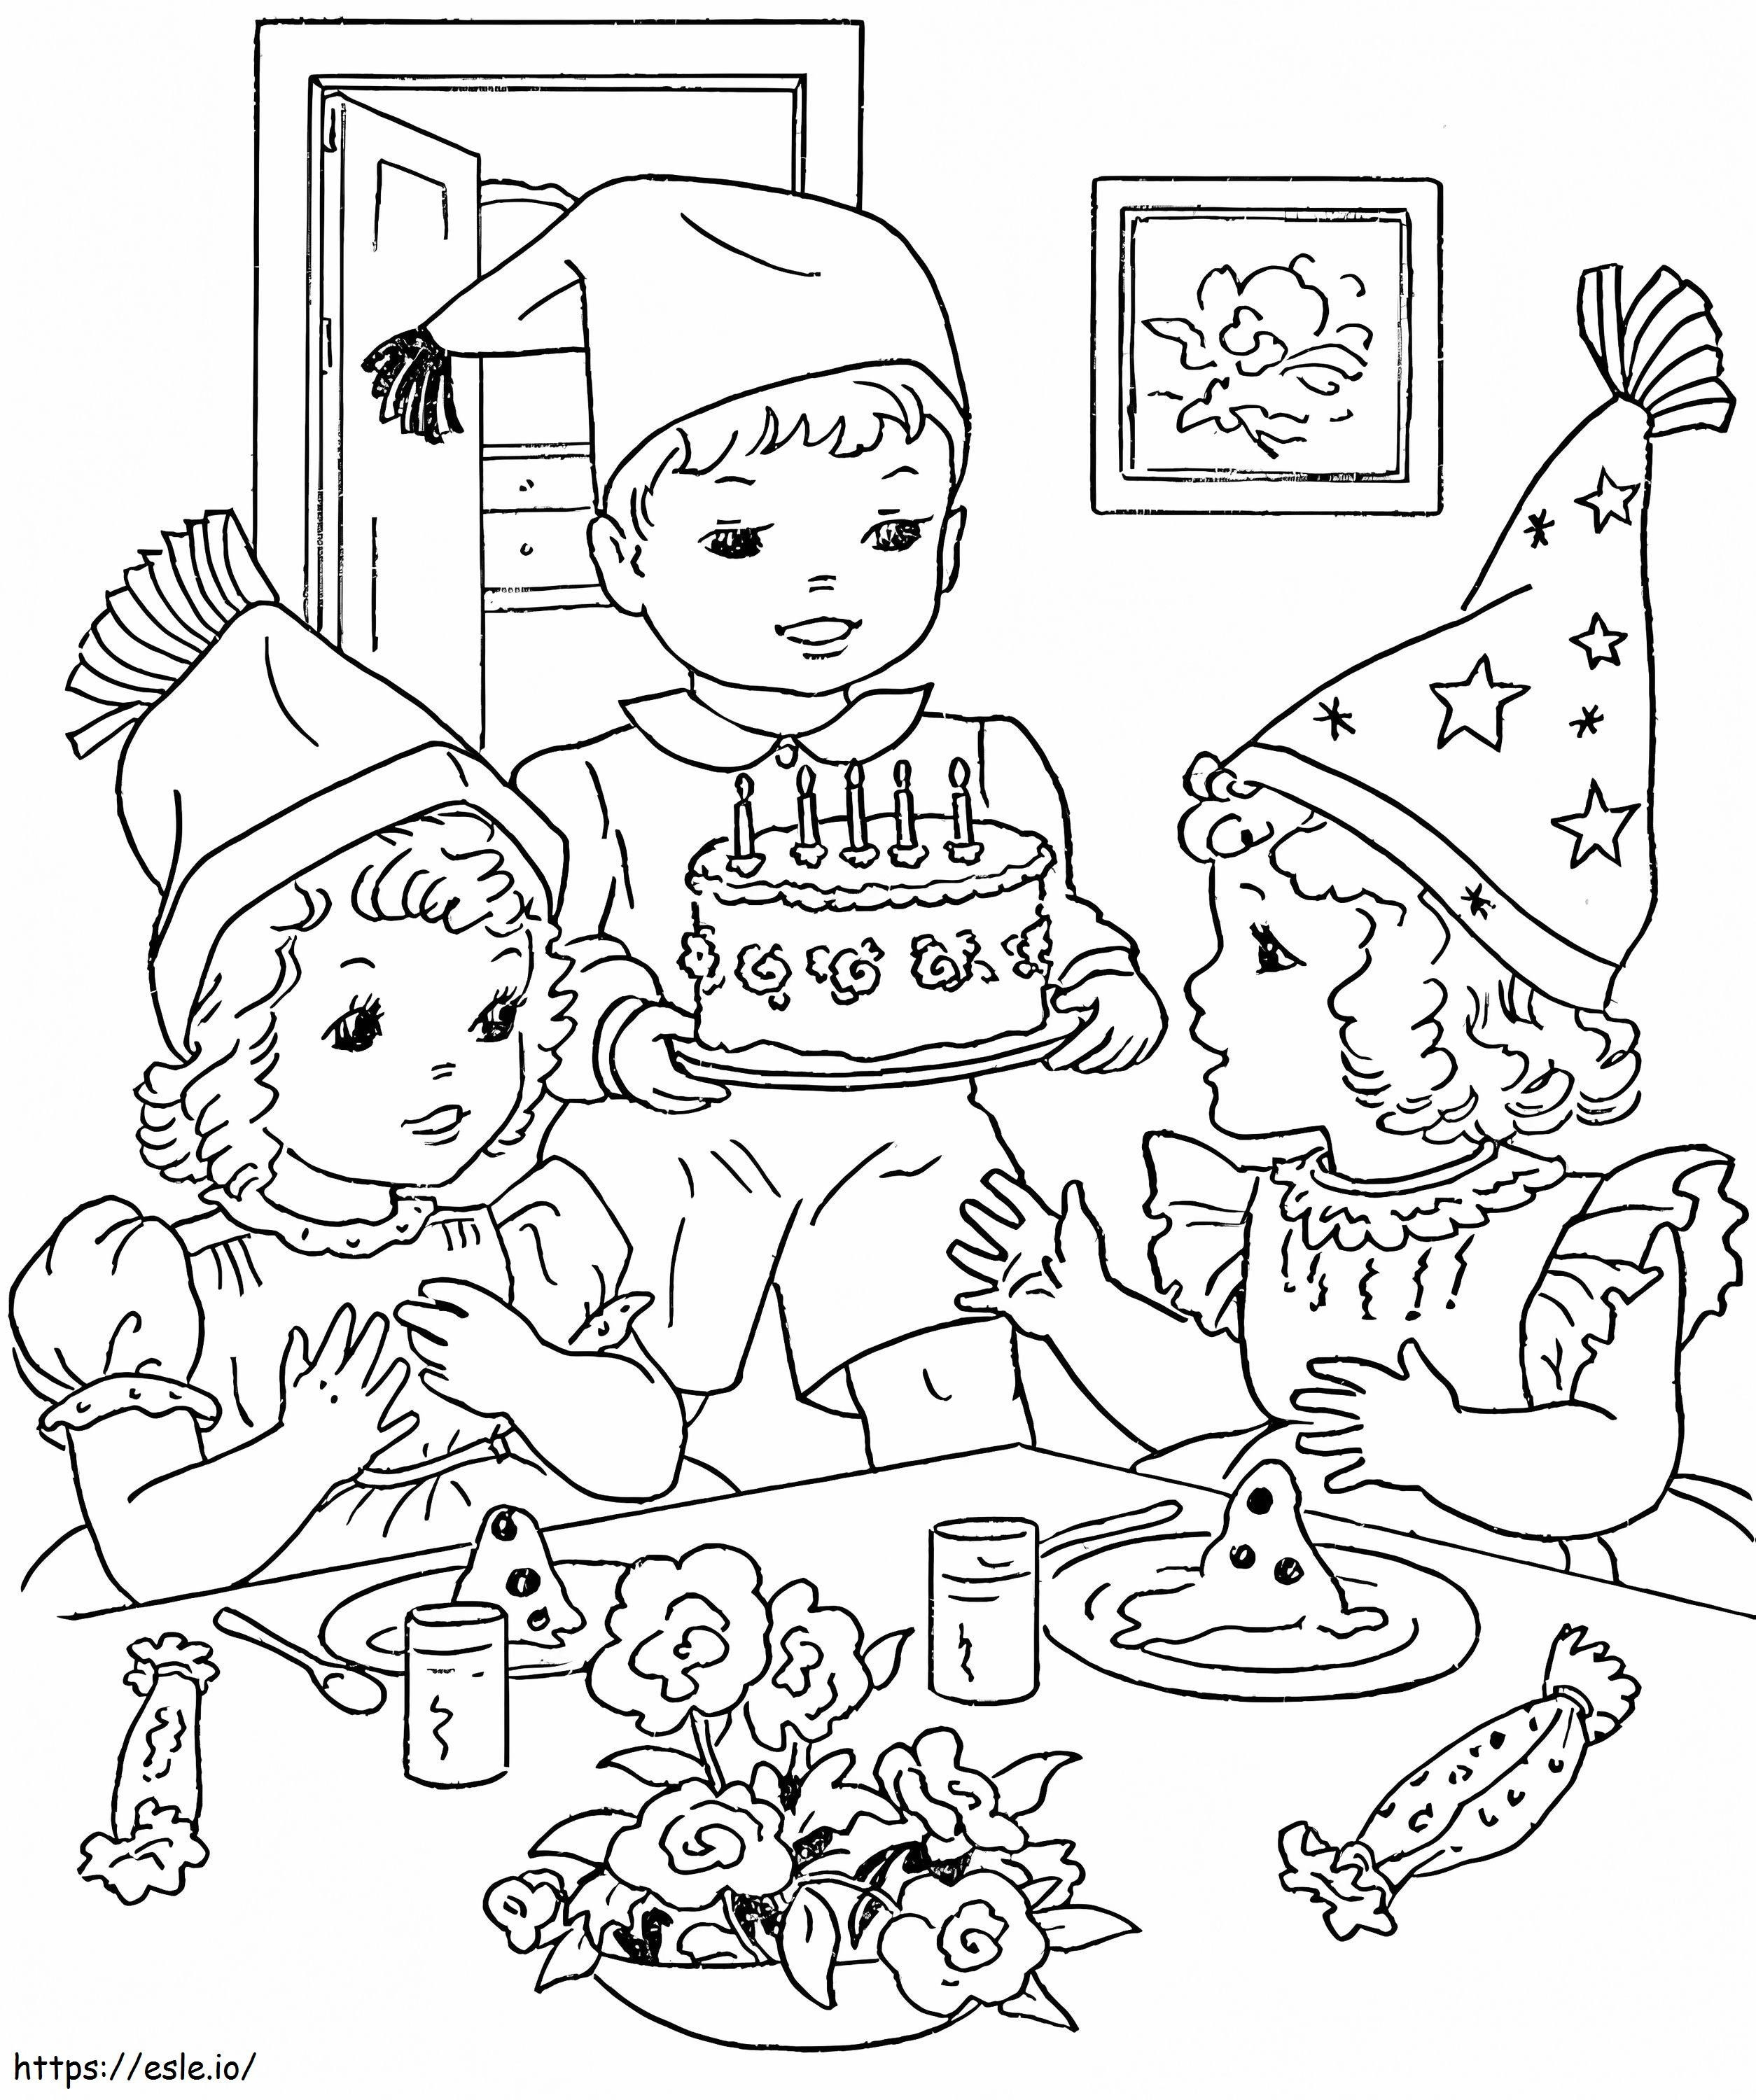 Untitled123456 coloring page